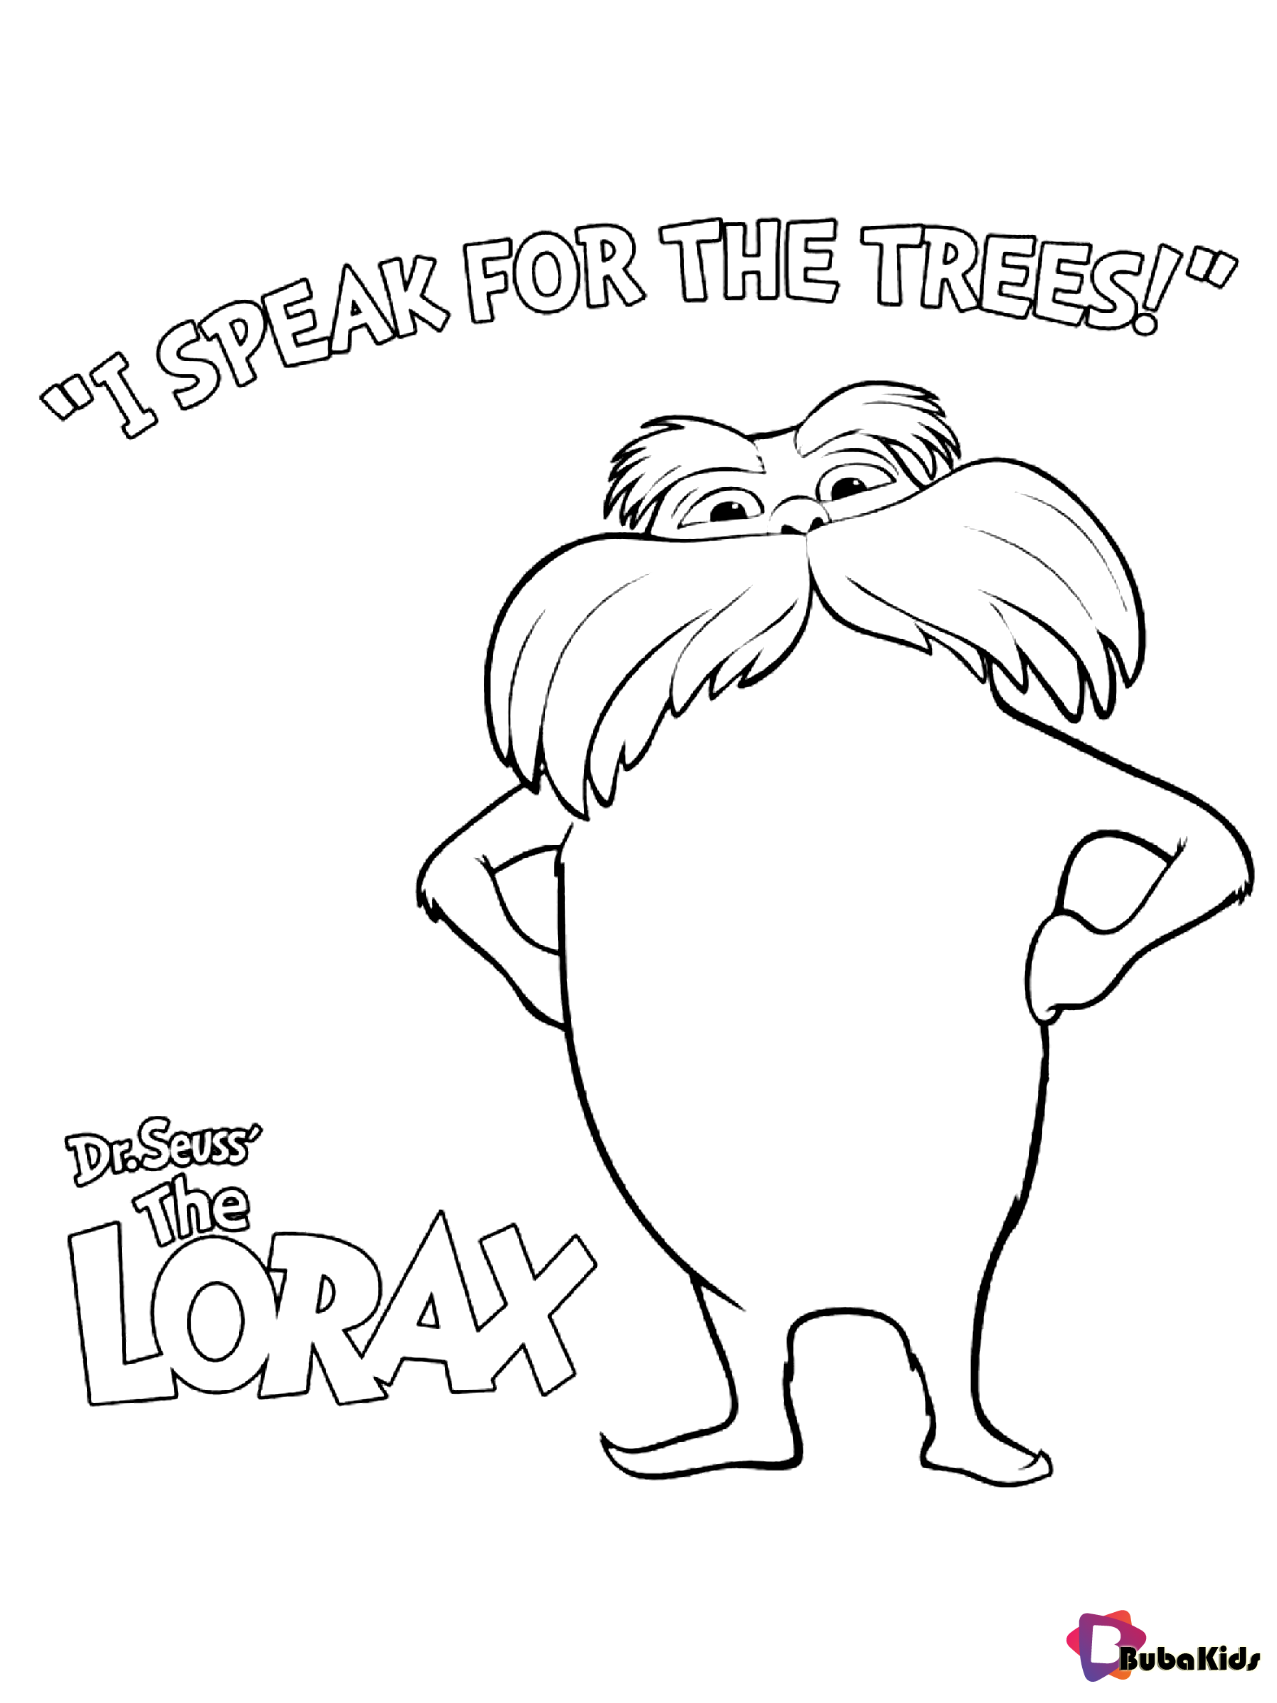 Dr seuss The Lorax I speak for the trees coloring pages